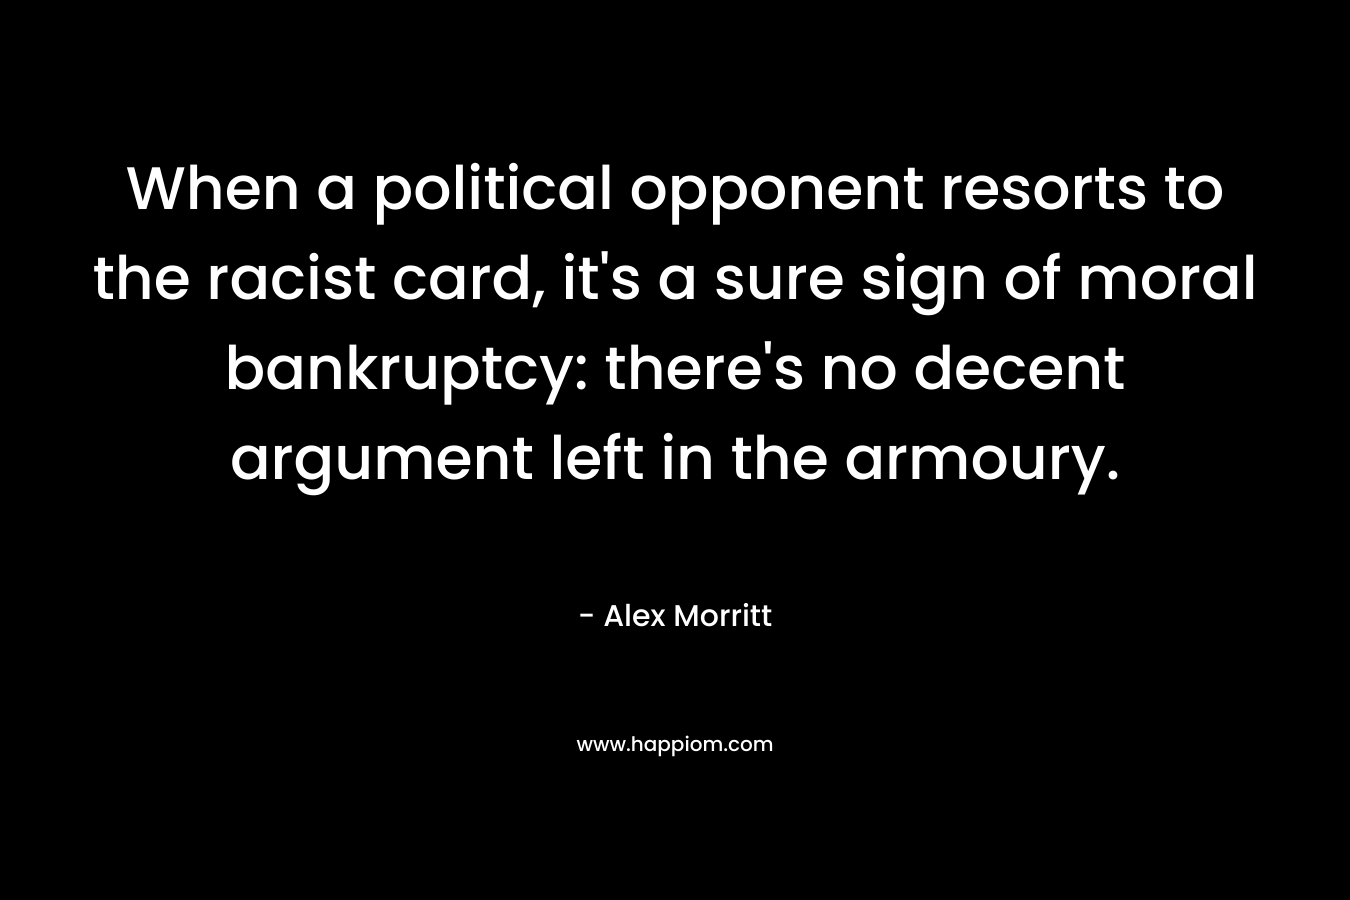 When a political opponent resorts to the racist card, it’s a sure sign of moral bankruptcy: there’s no decent argument left in the armoury. – Alex Morritt